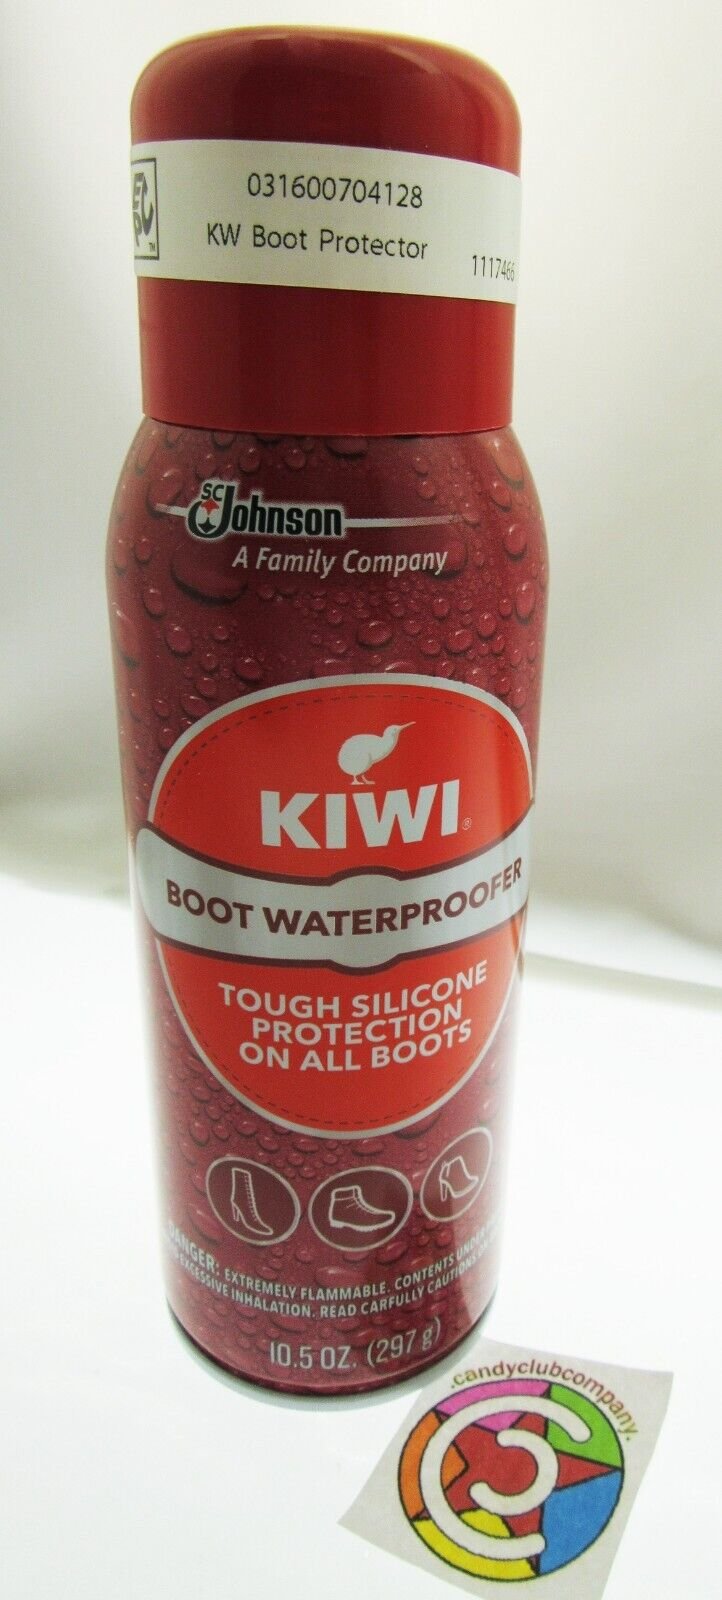 Kiwi Boot Water Proofer Silicone Water Repellent Kiwi Gear and Footwear Outdoor